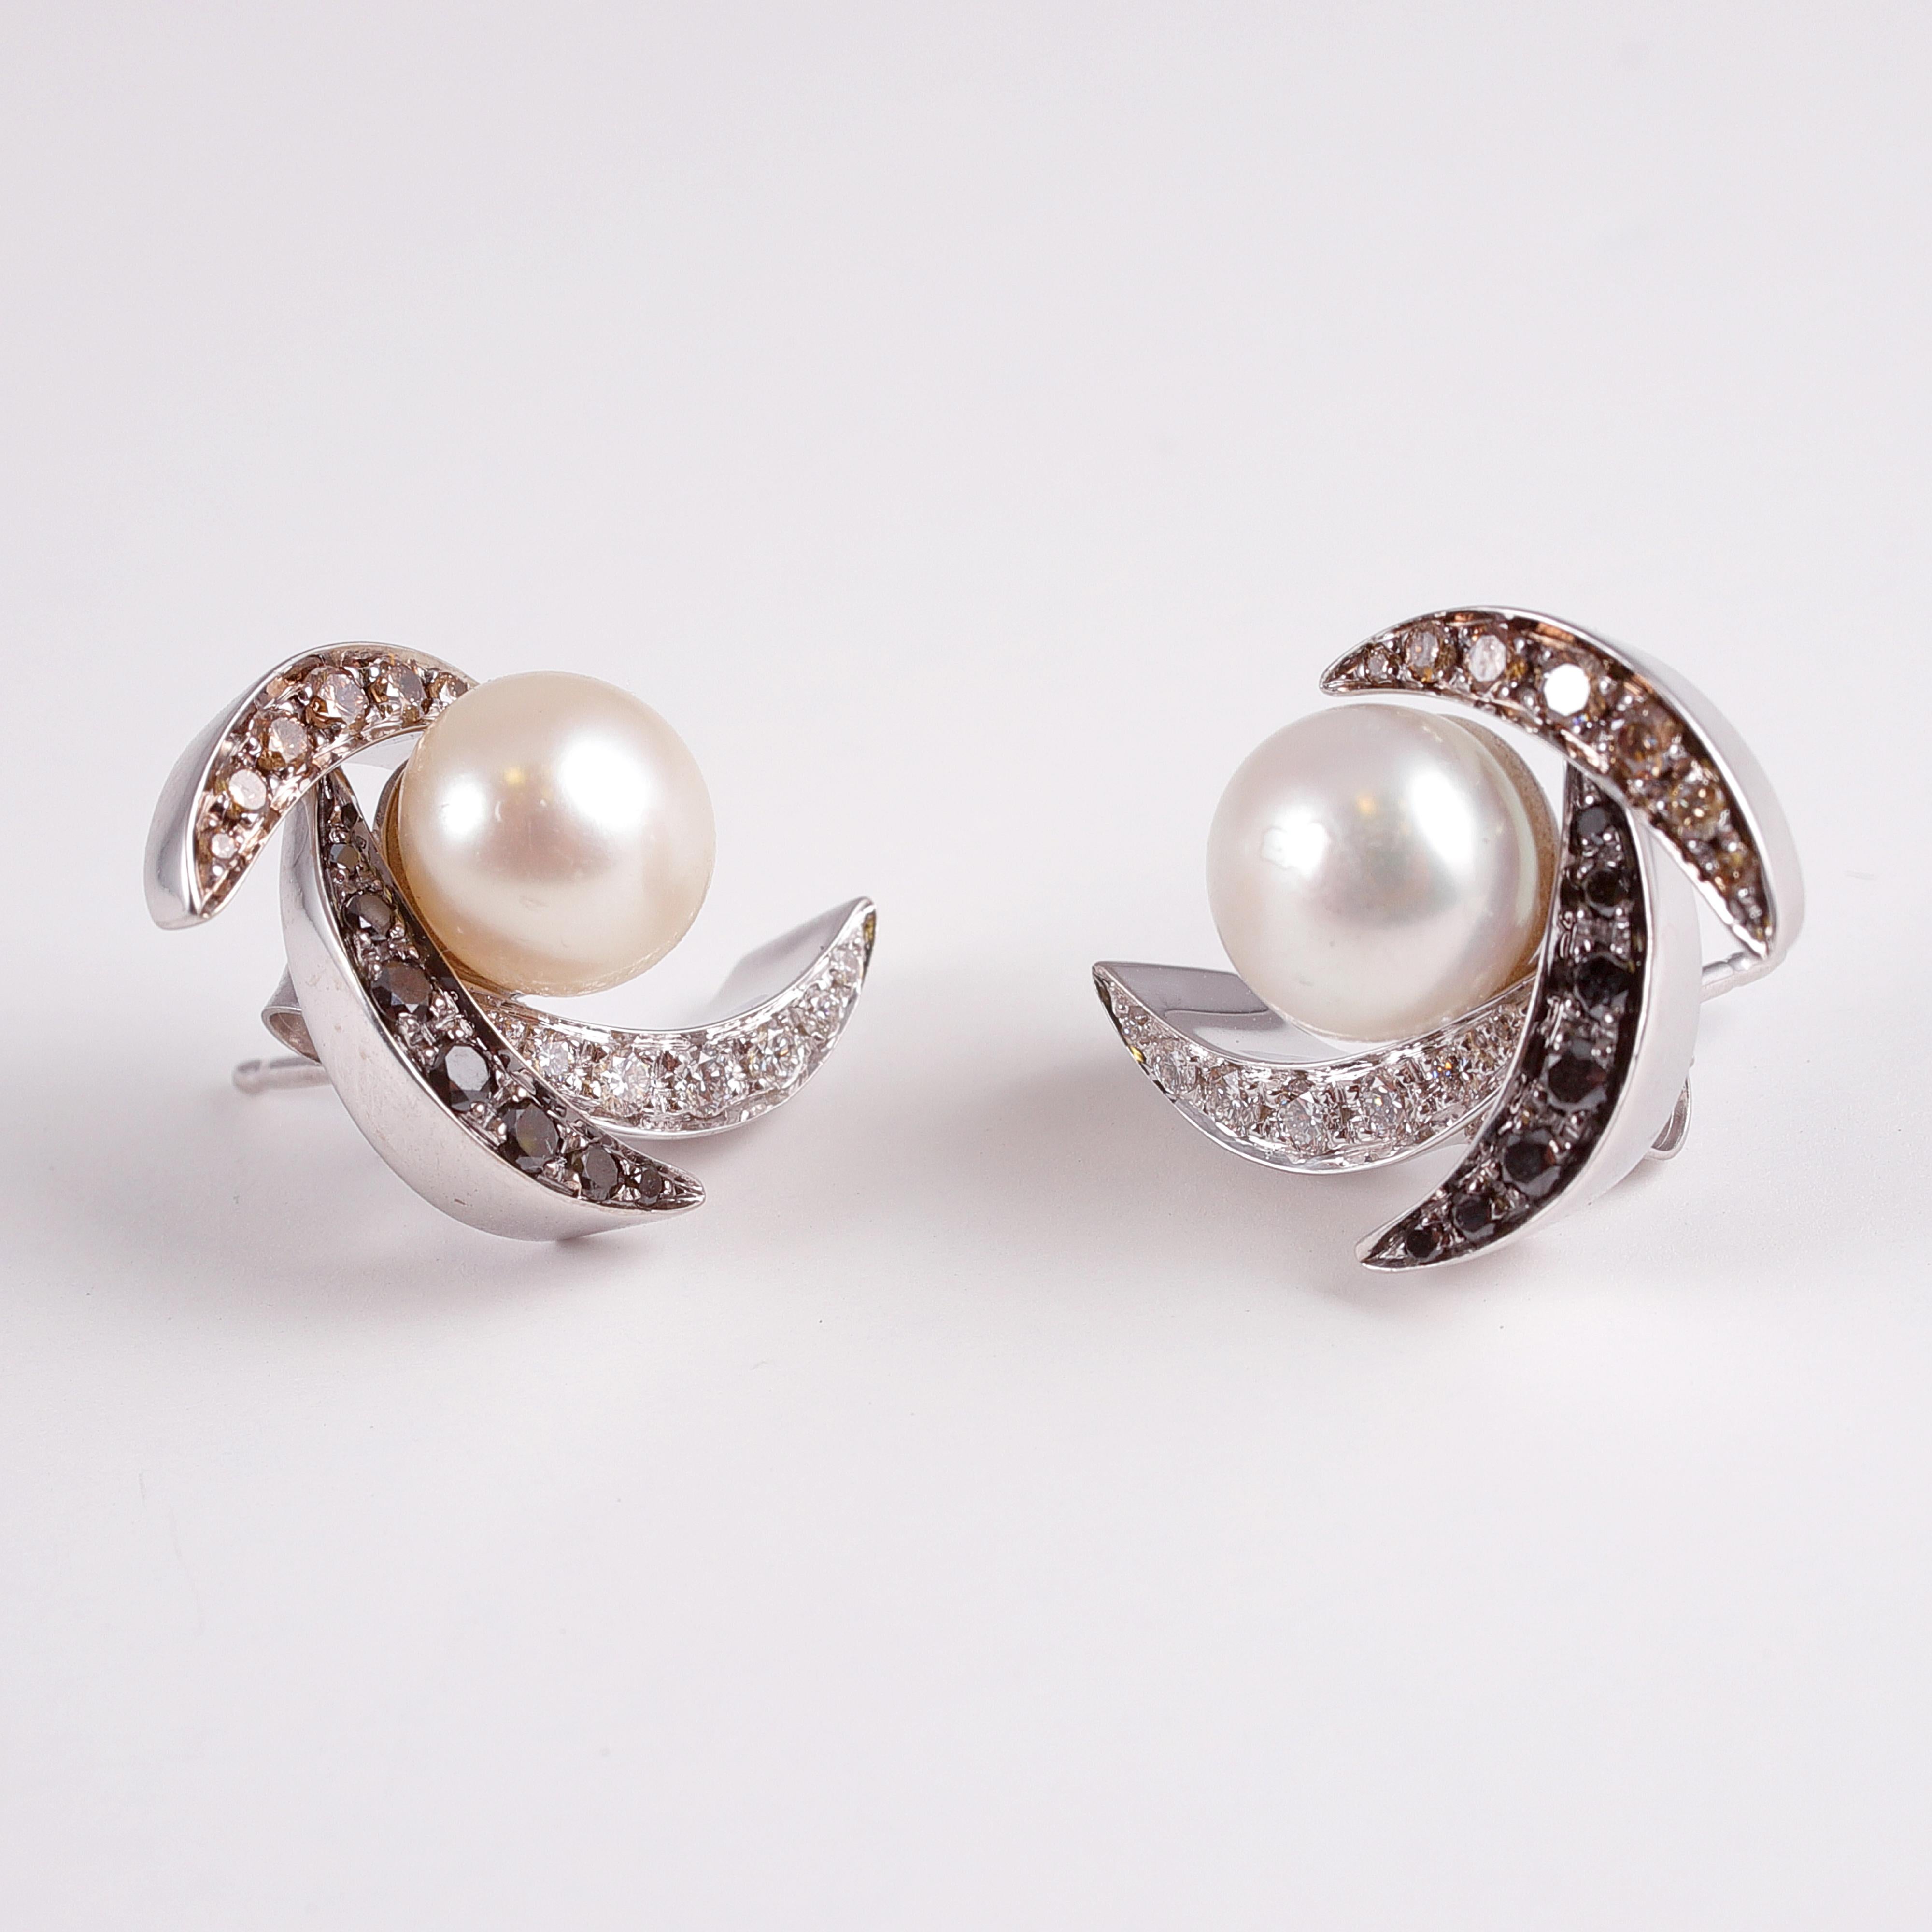 Round Cut Cultured Pearl with Diamond Earrings by IO Si For Sale